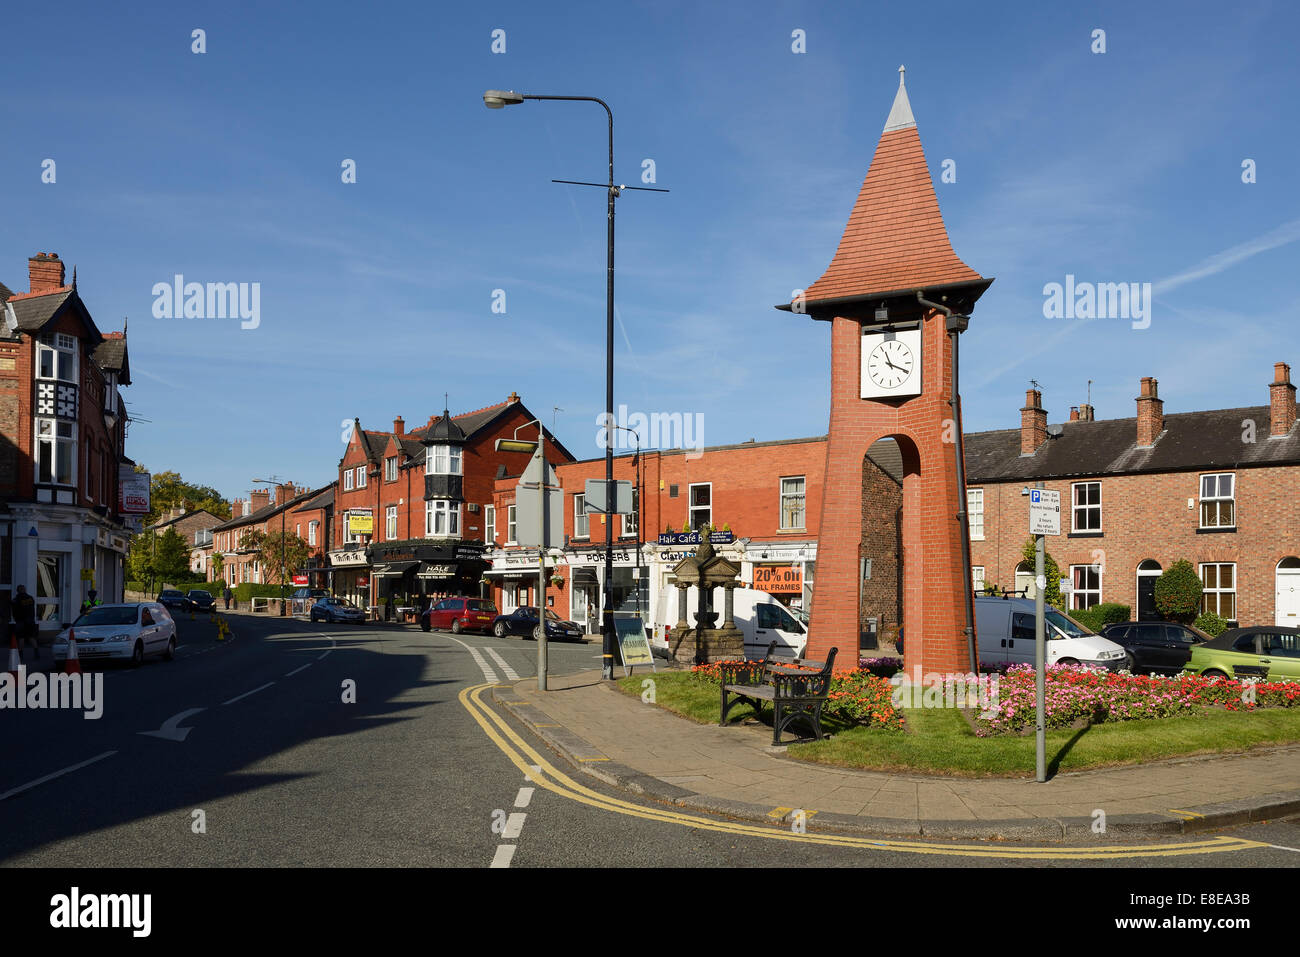 The Millennium clock tower in the centre of Hale village Greater Manchester UK Stock Photo